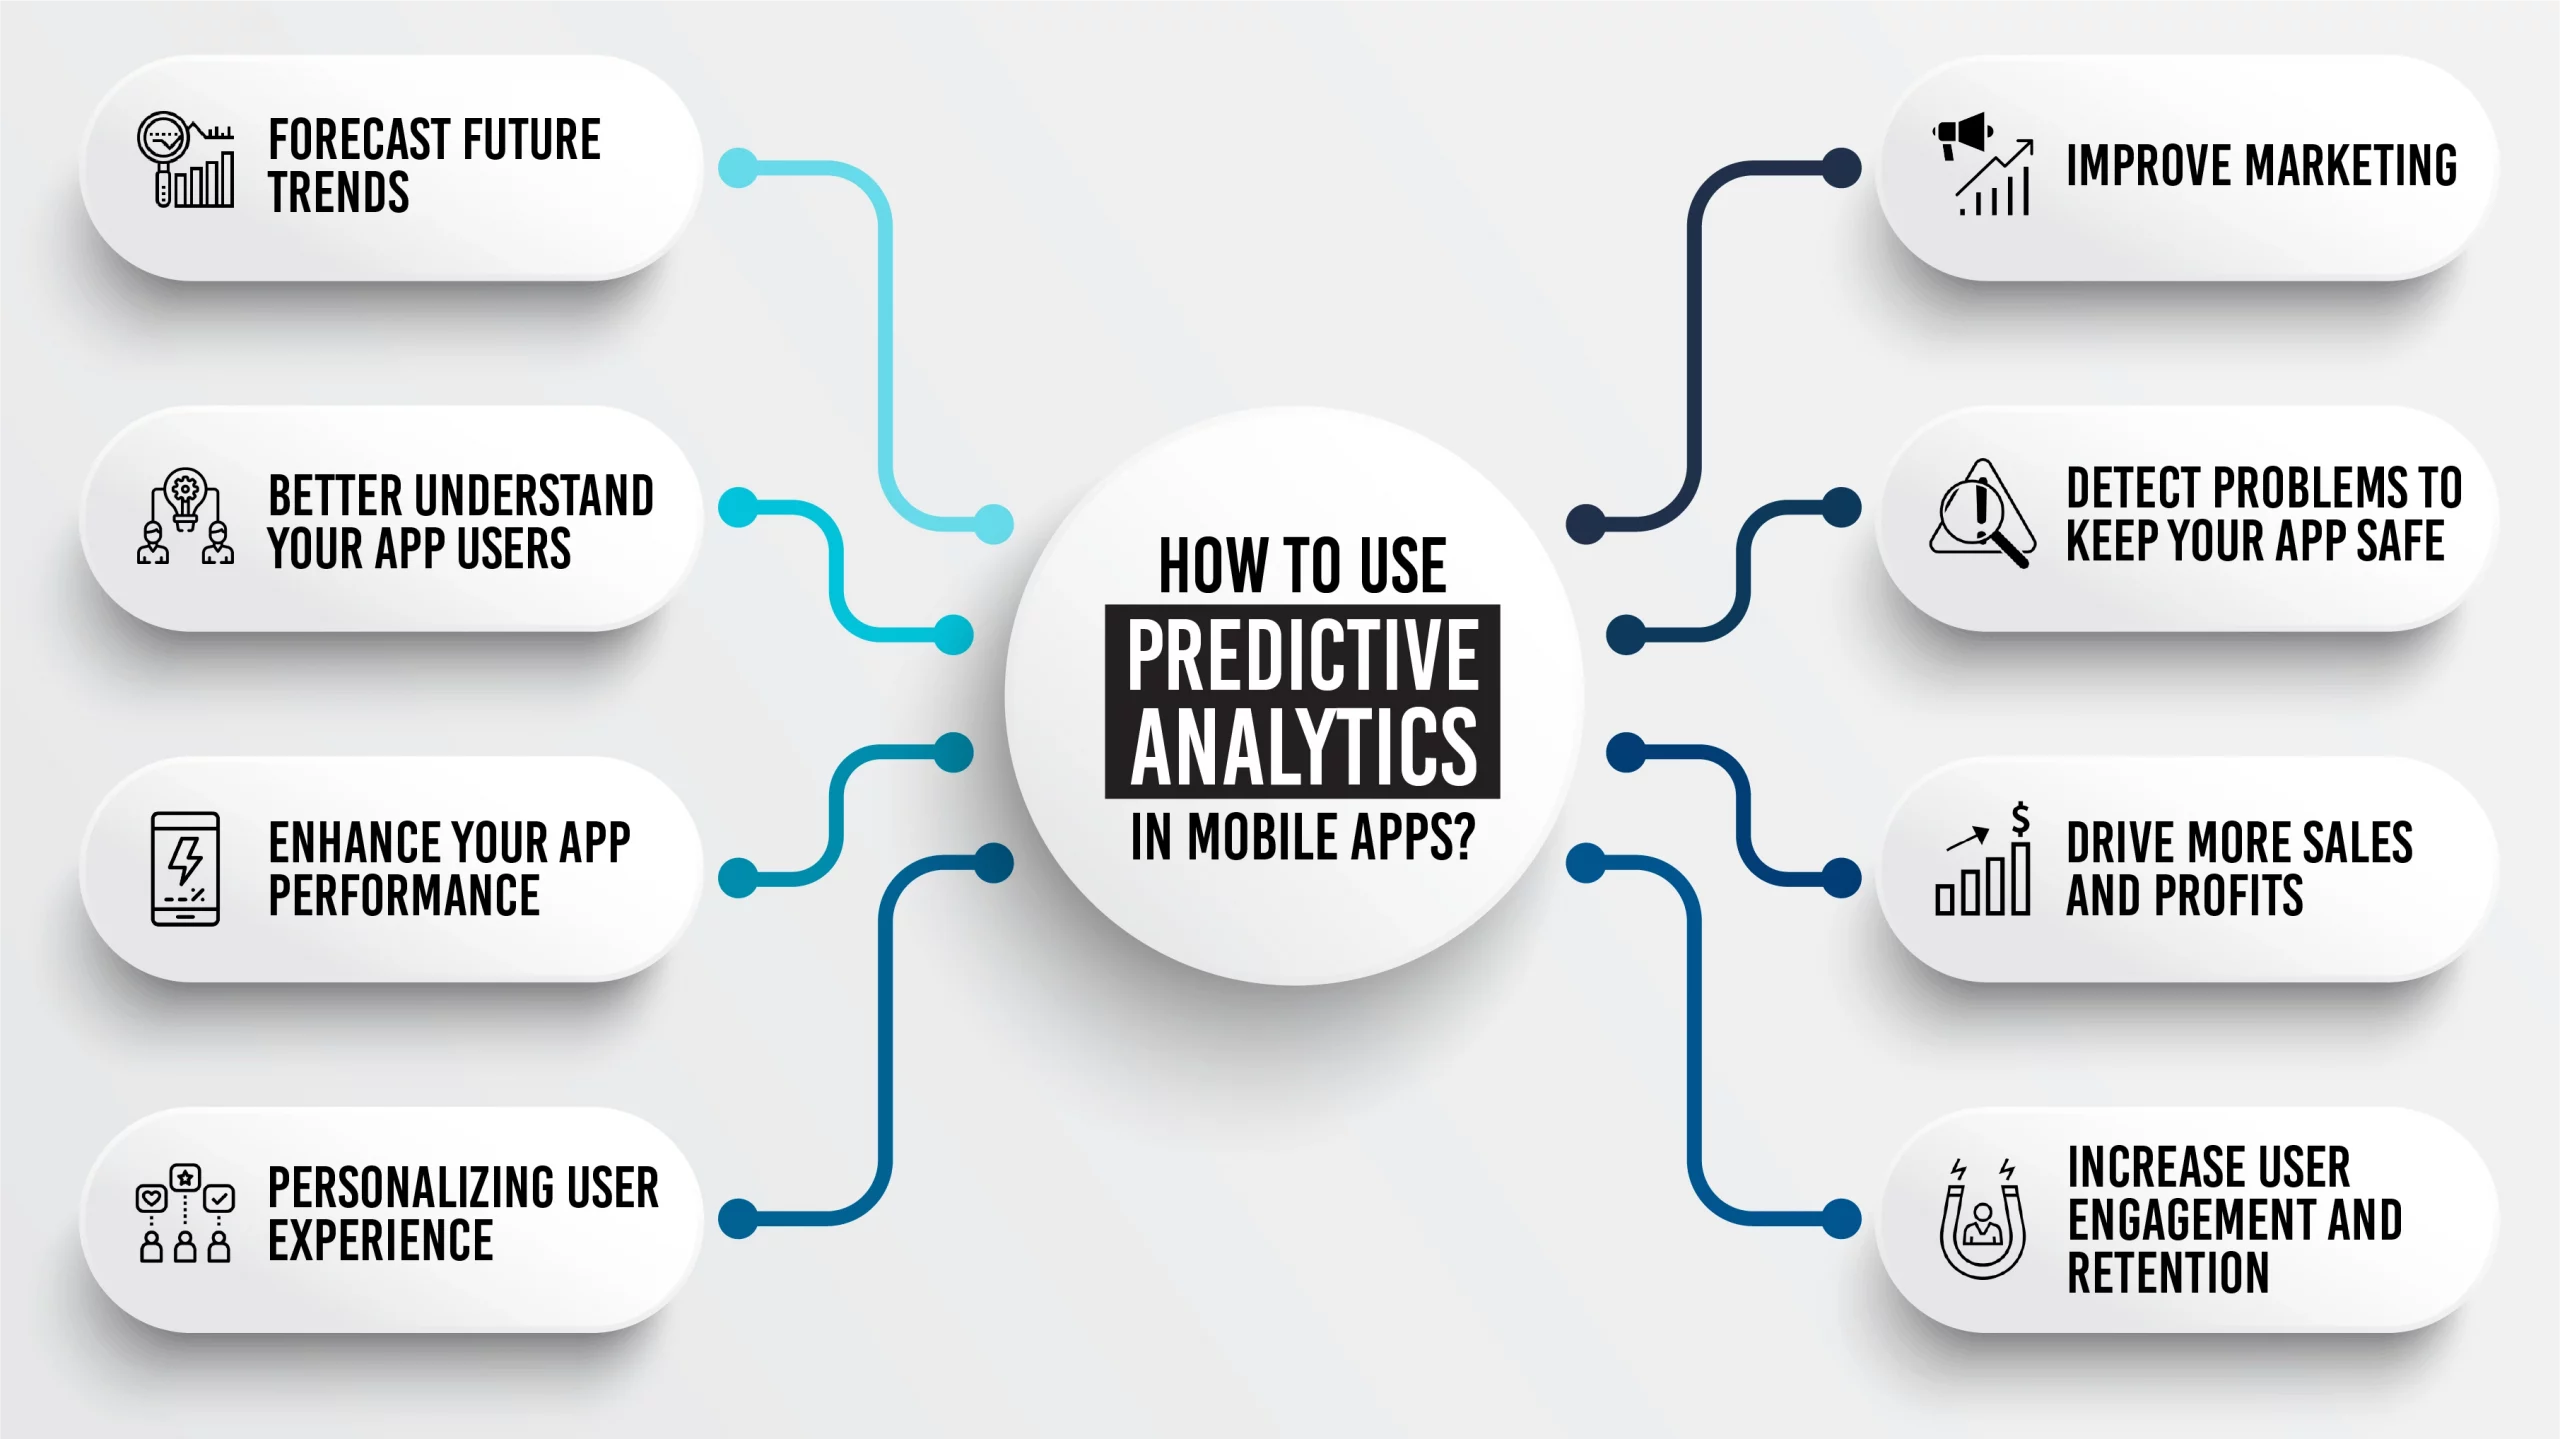 How to Use Predictive Analytics in Mobile Apps